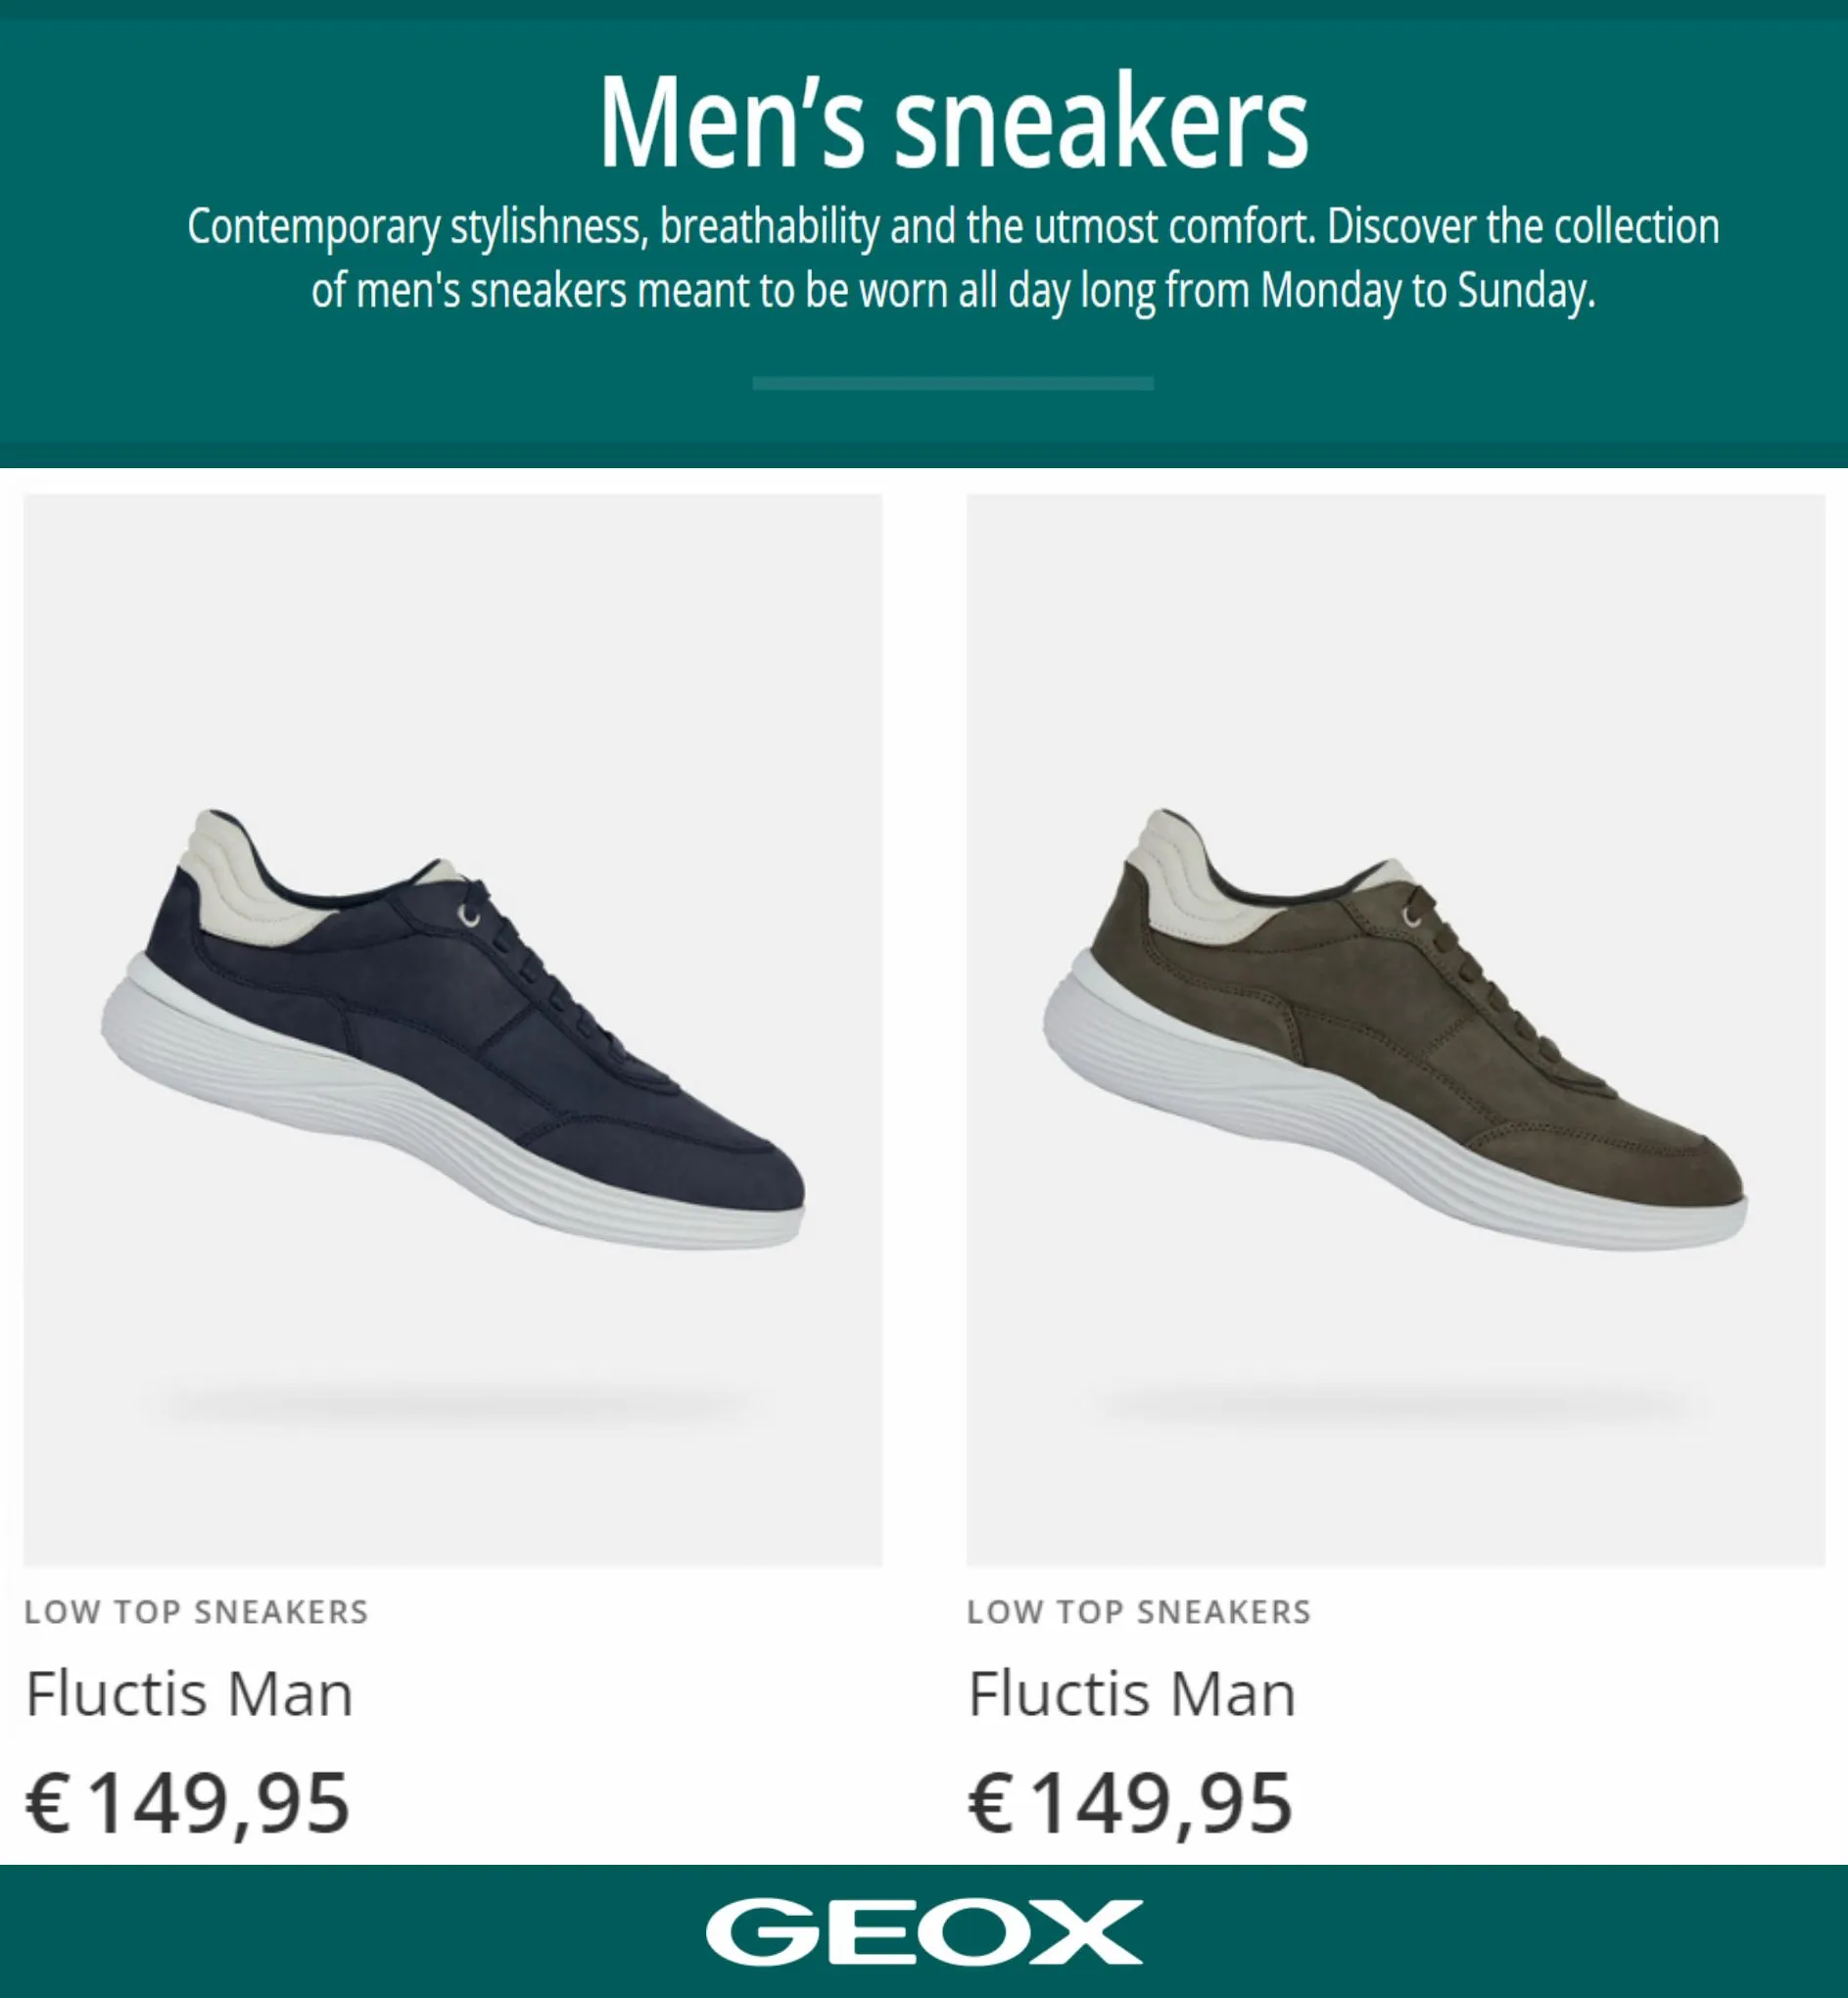 Catalogue Men's Sneakers, page 00004